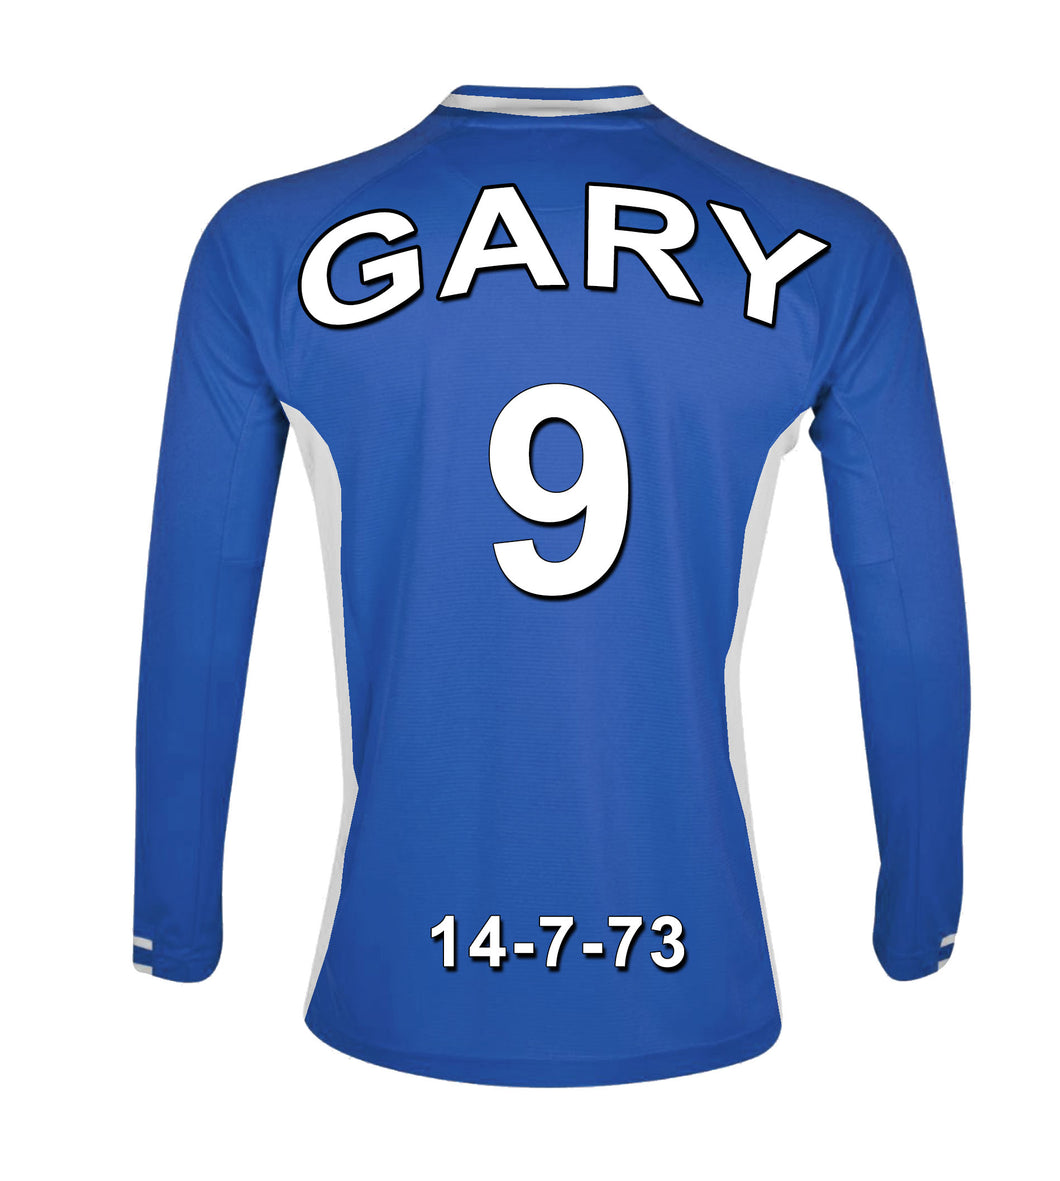 Leicester City blue and white  personalised football shirt canvas